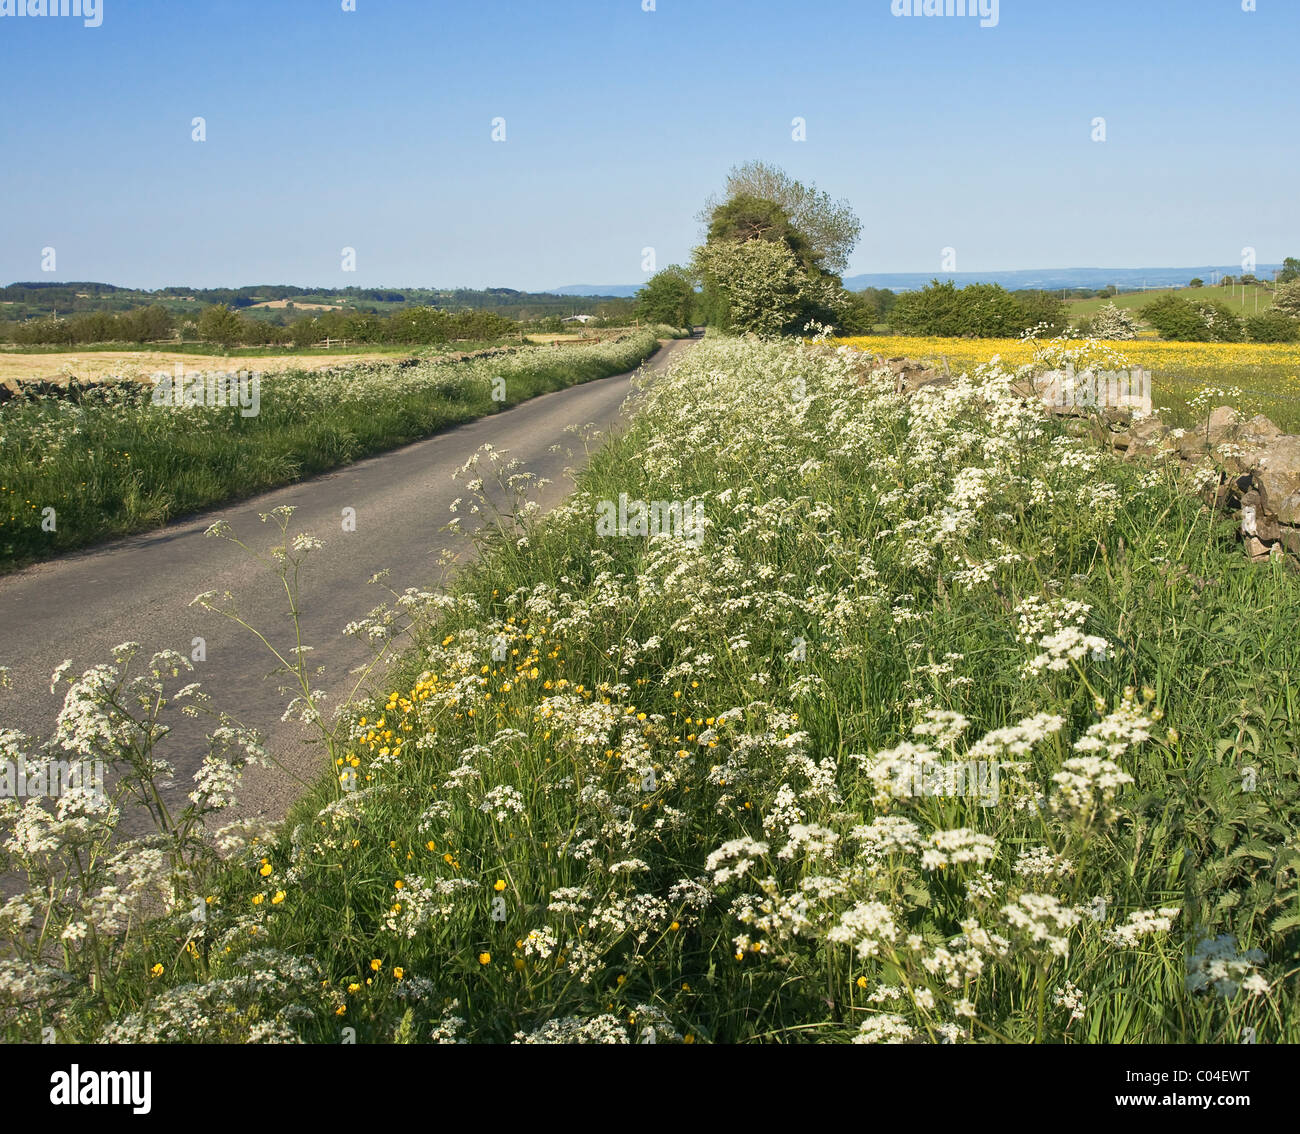 Country road near Leyburn, North Yorkshire. grass verge with cow parsley in flower and a field covered in dandelions. Stock Photo